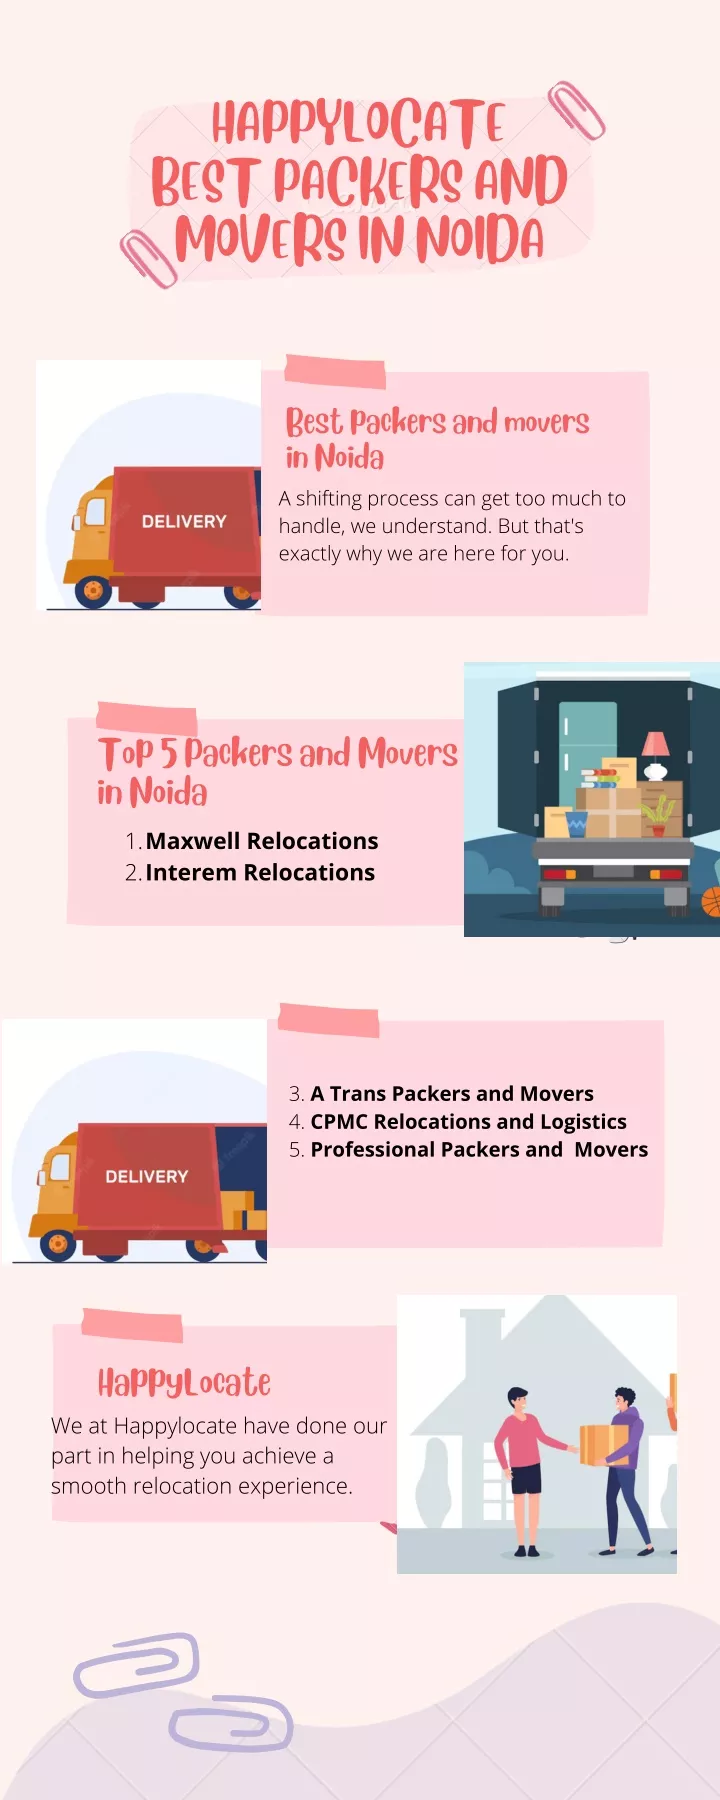 happylocate best packers and movers in noida